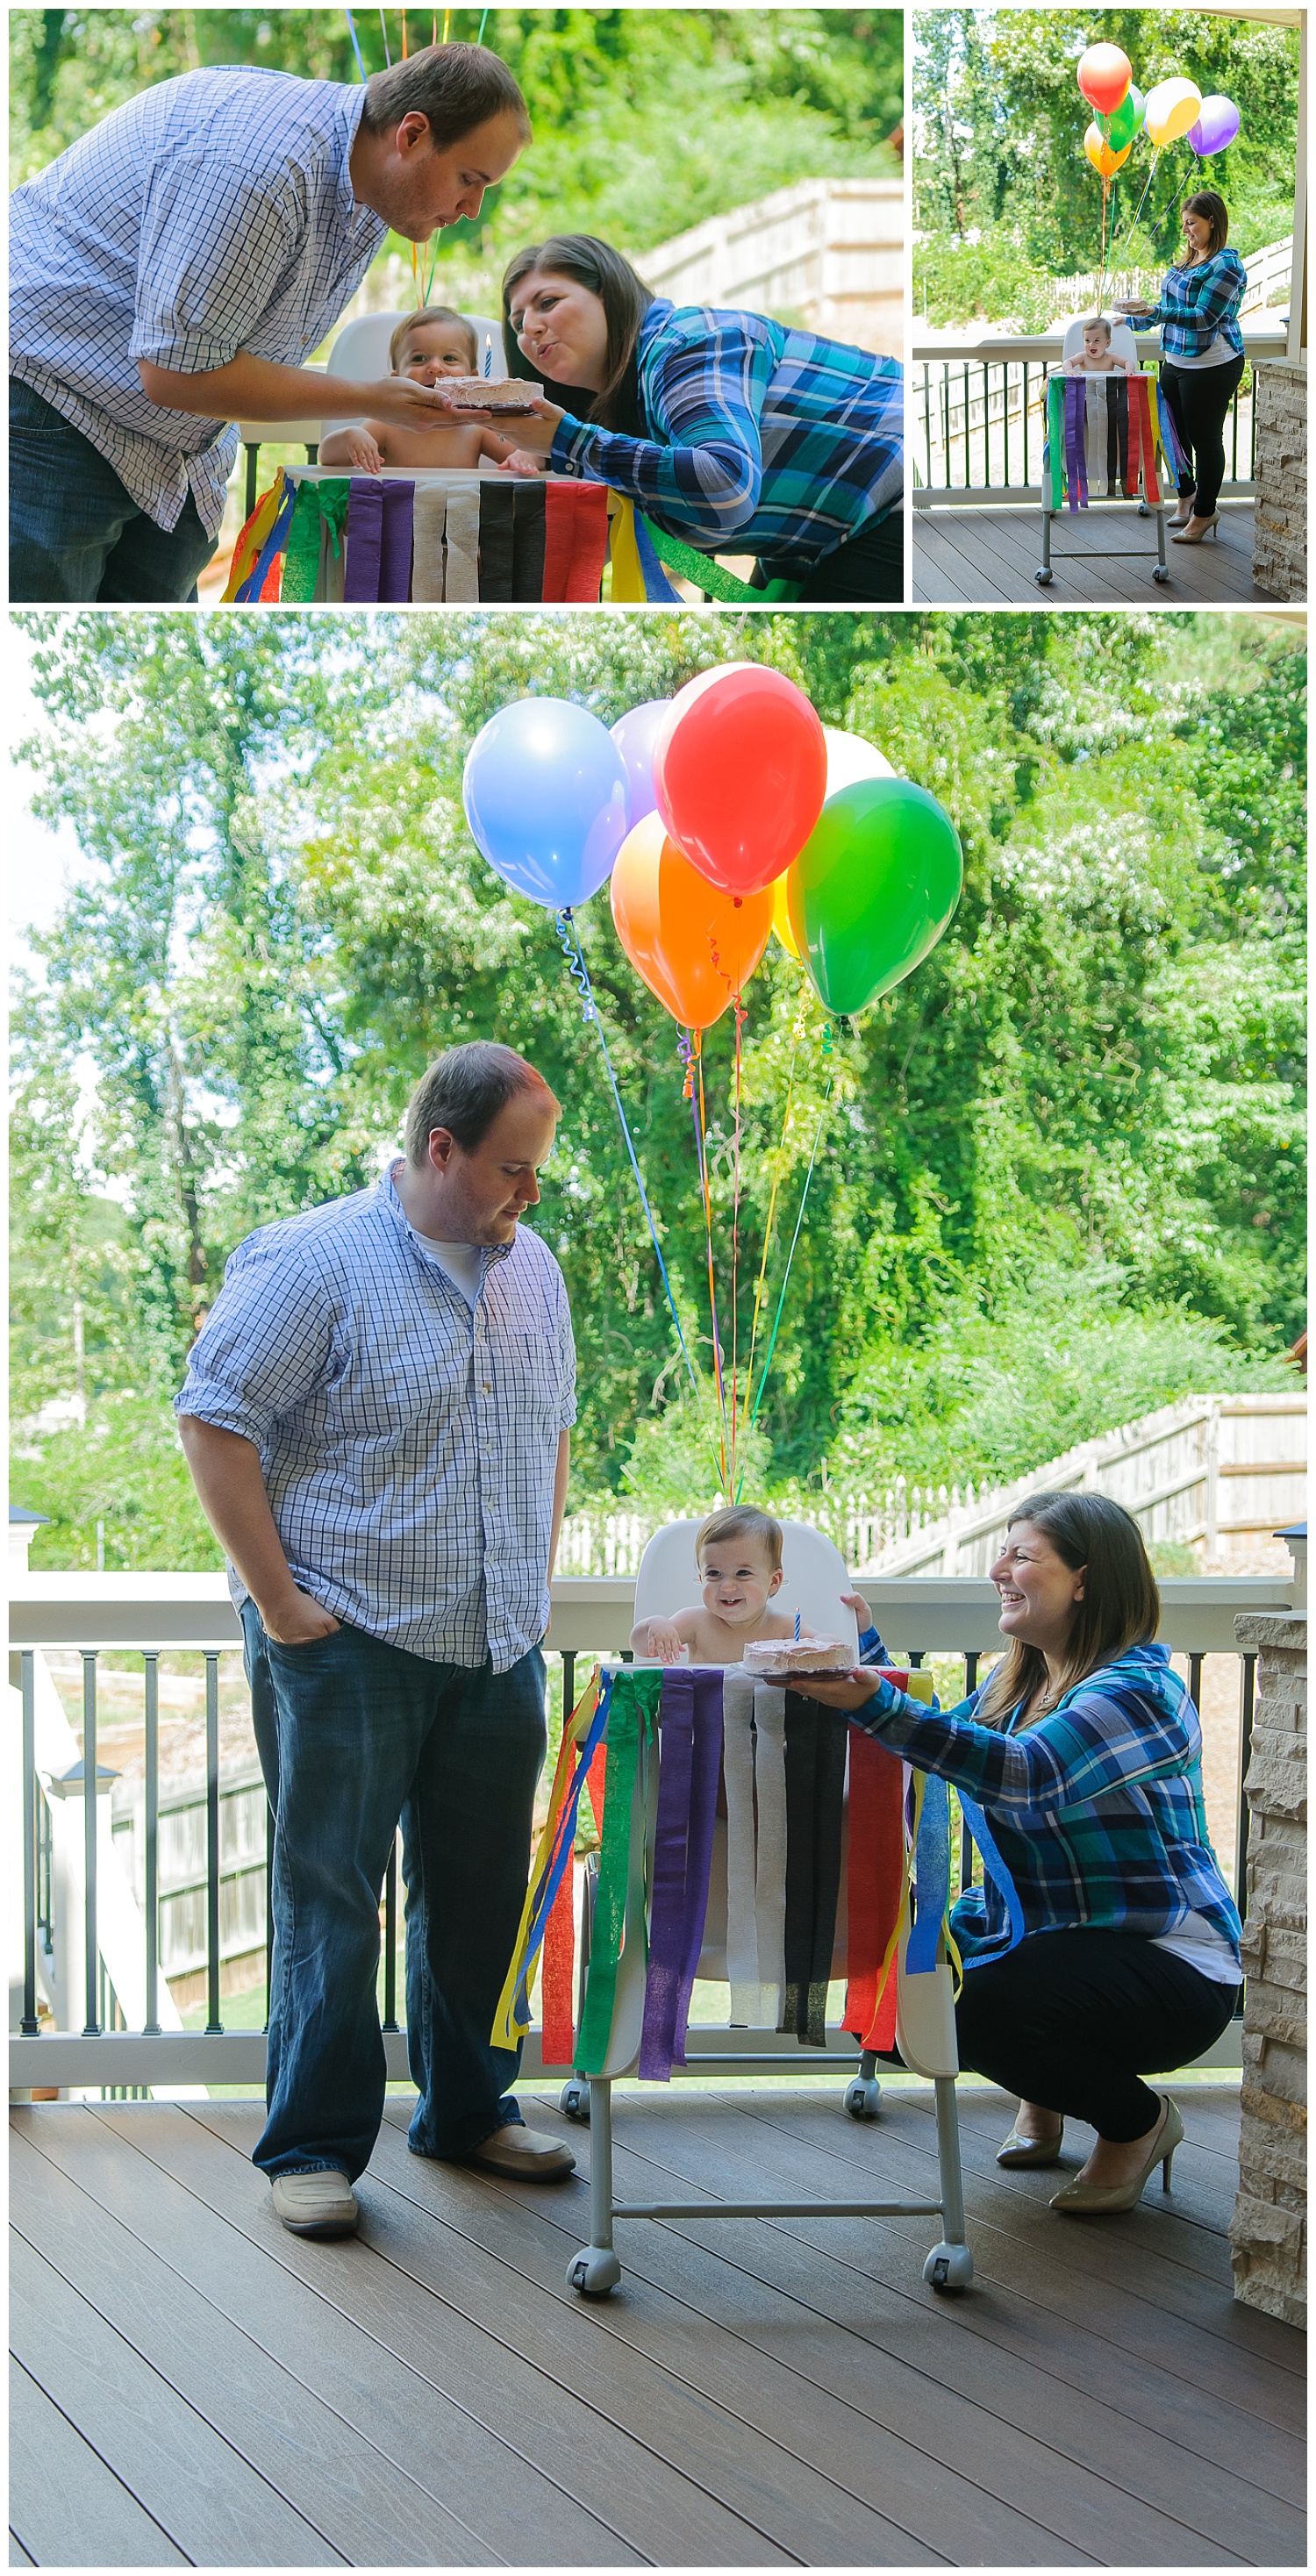 these are stacked images of a mother, father, and their one year old son. they are outside with balloons and birthday cake and the child is about to have a cake smash.